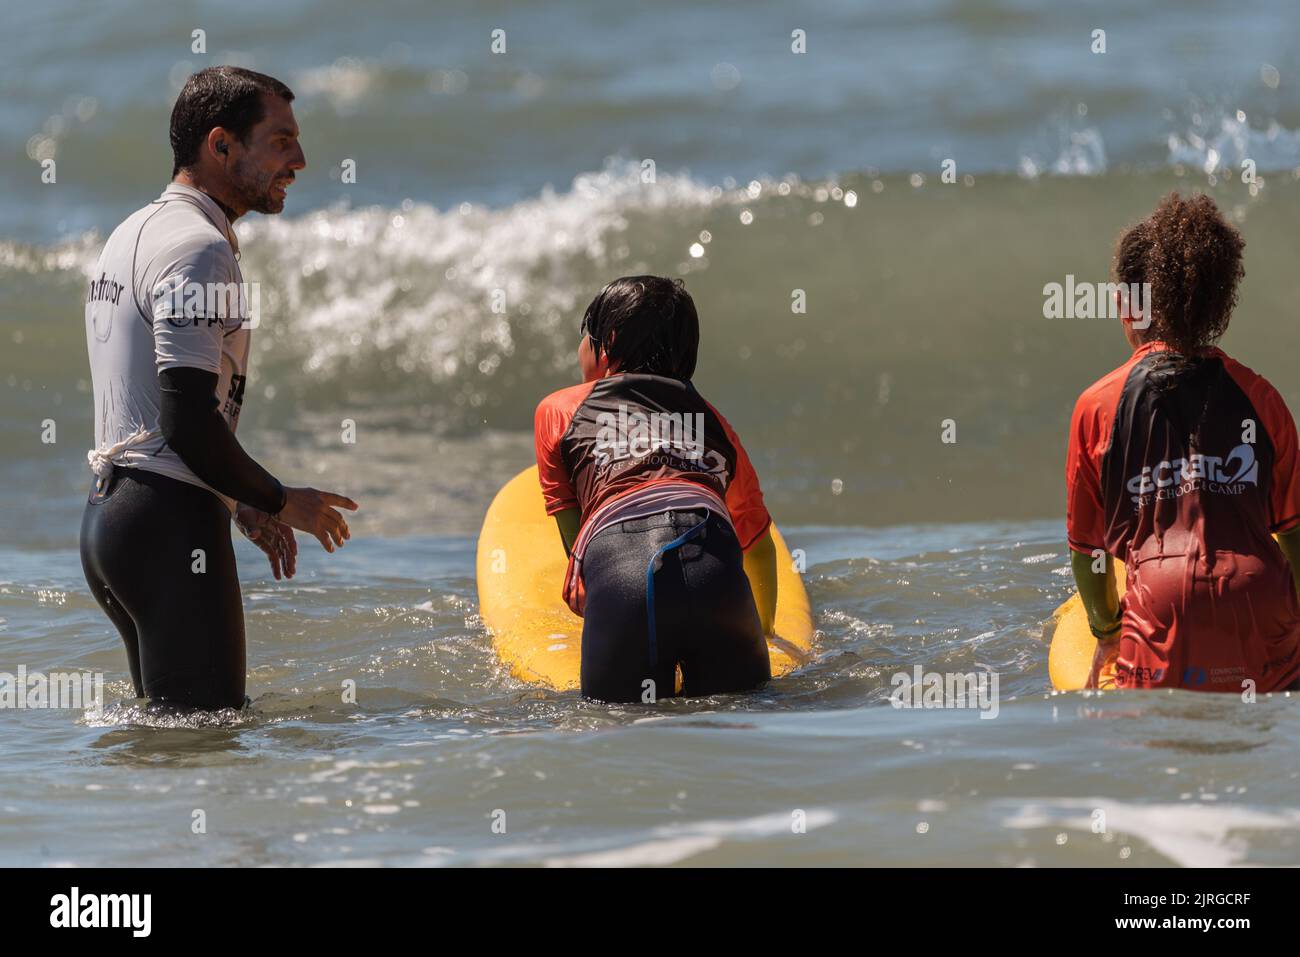 Aveiro, Portugal - August 19, 2022: A group of children practice with a surf instructor on the beach. Stock Photo